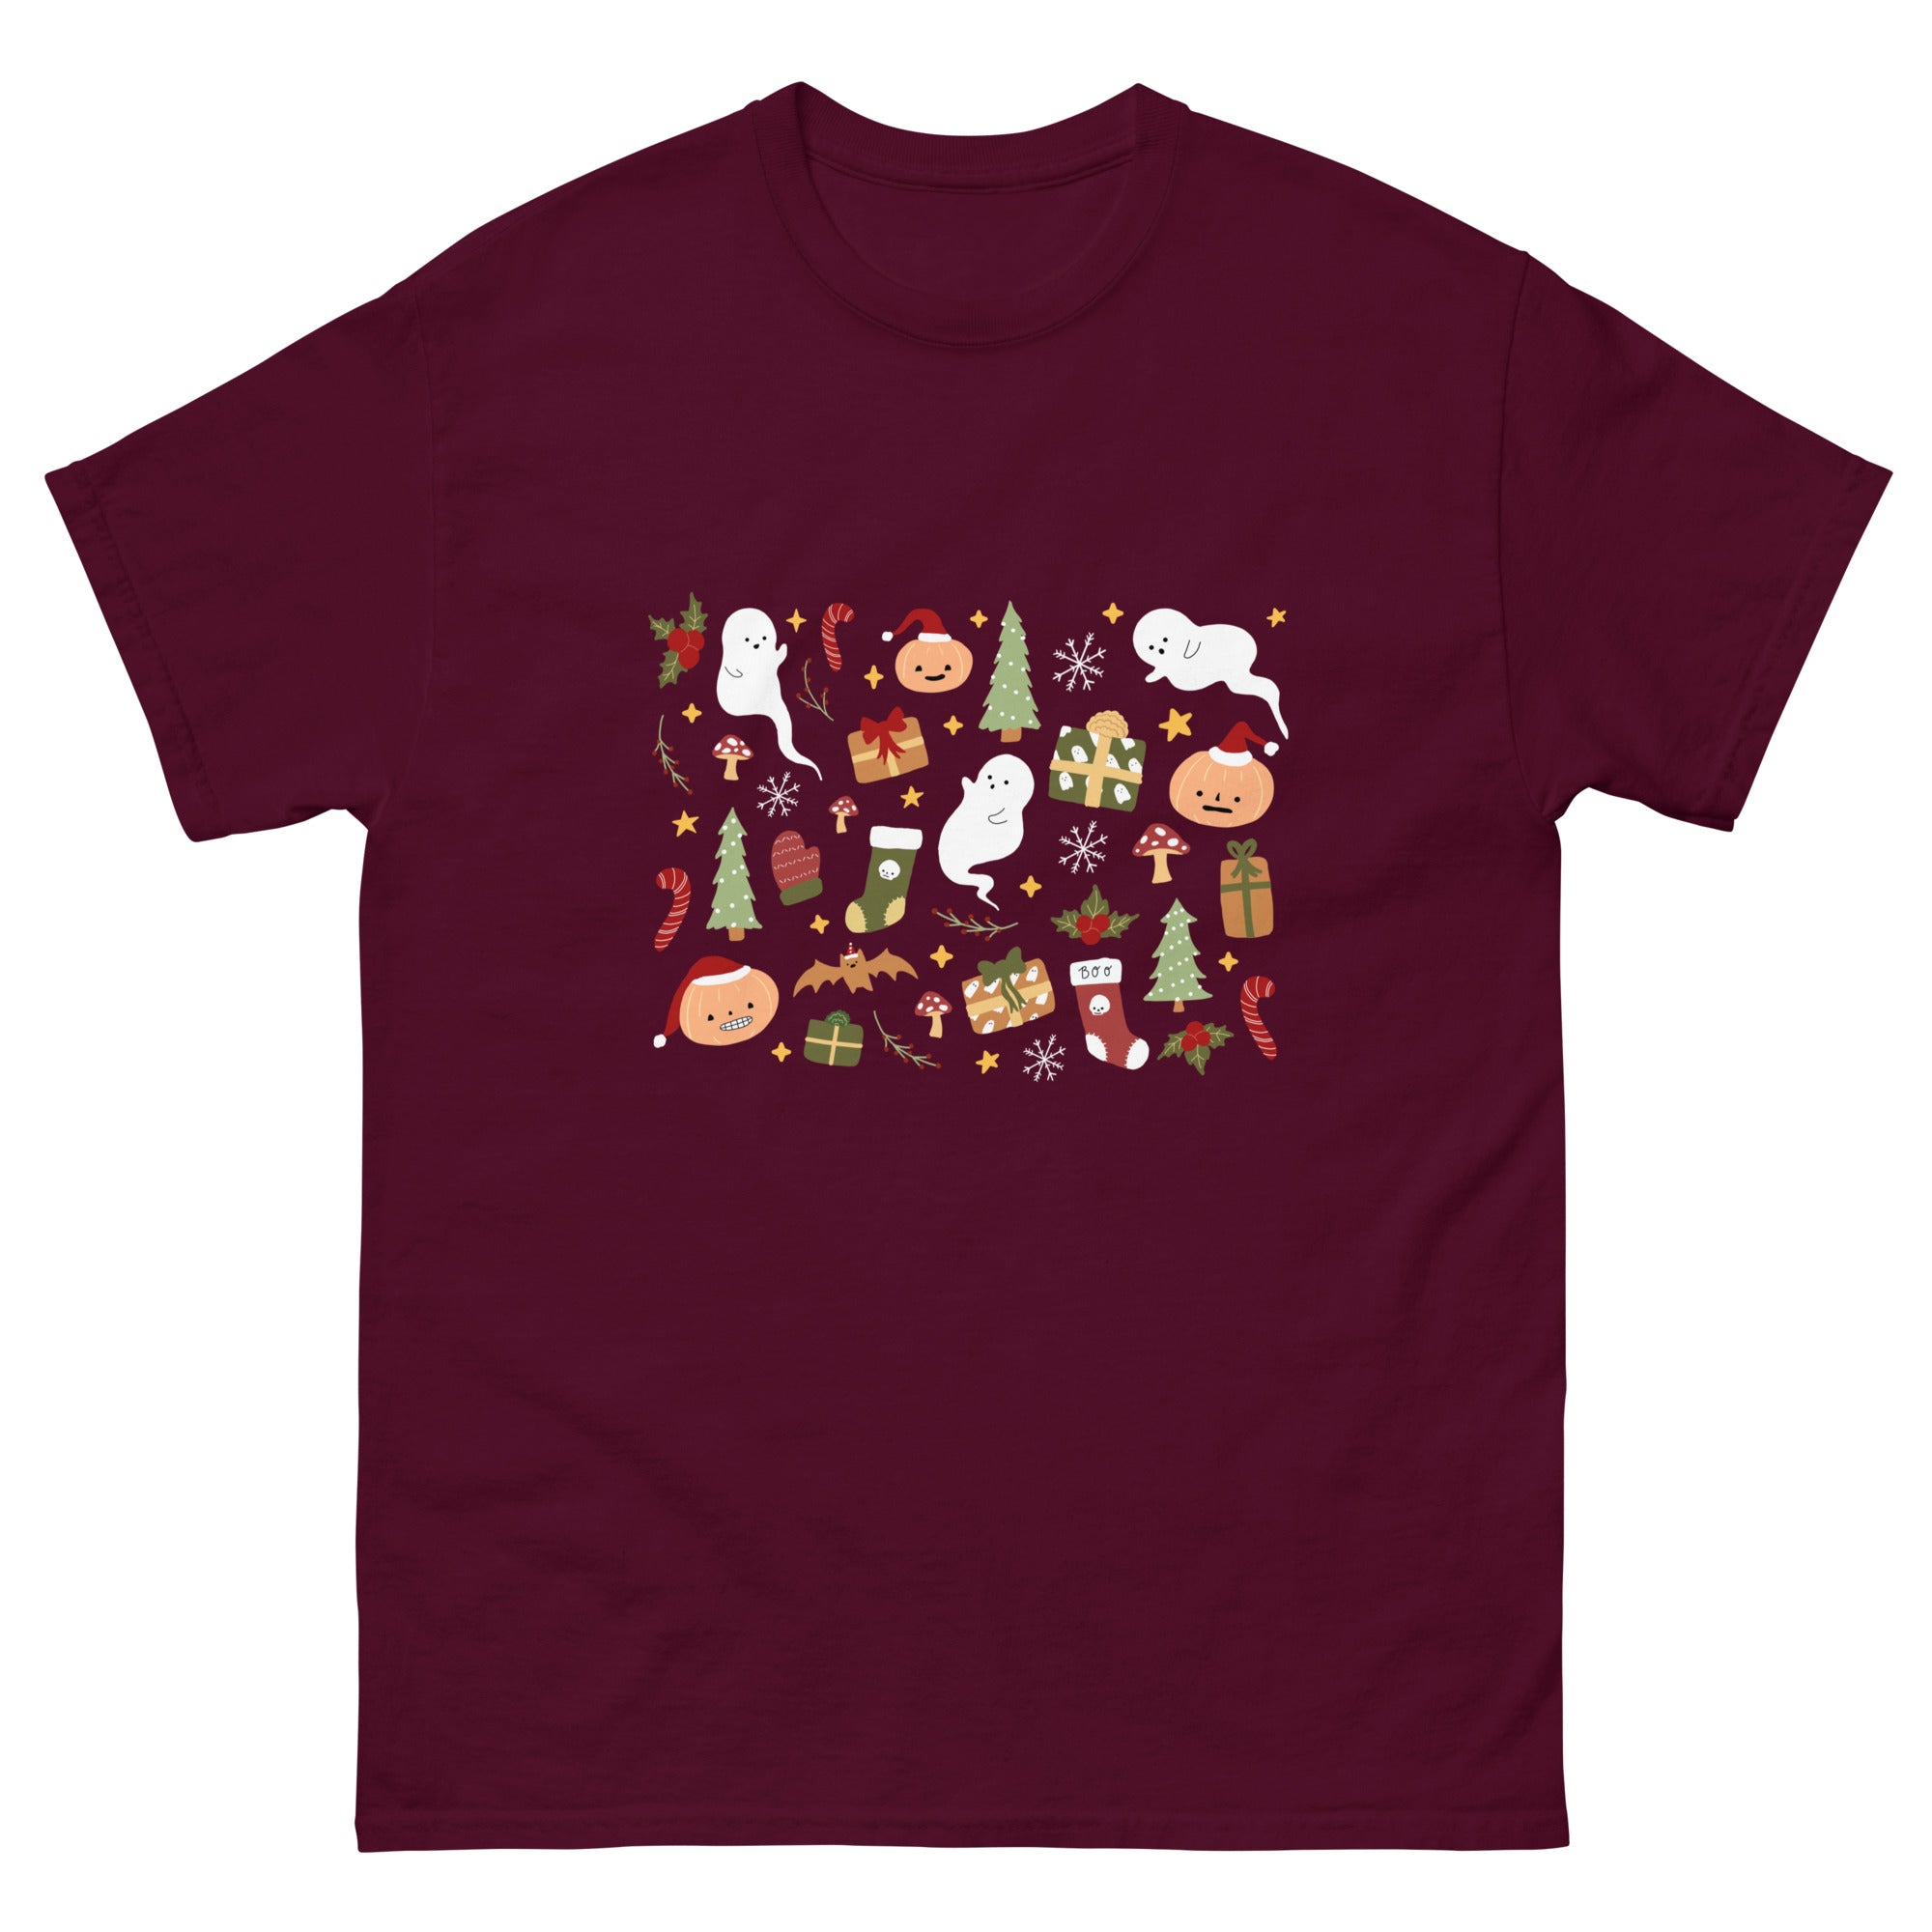 Wholesome Holiday classic tee